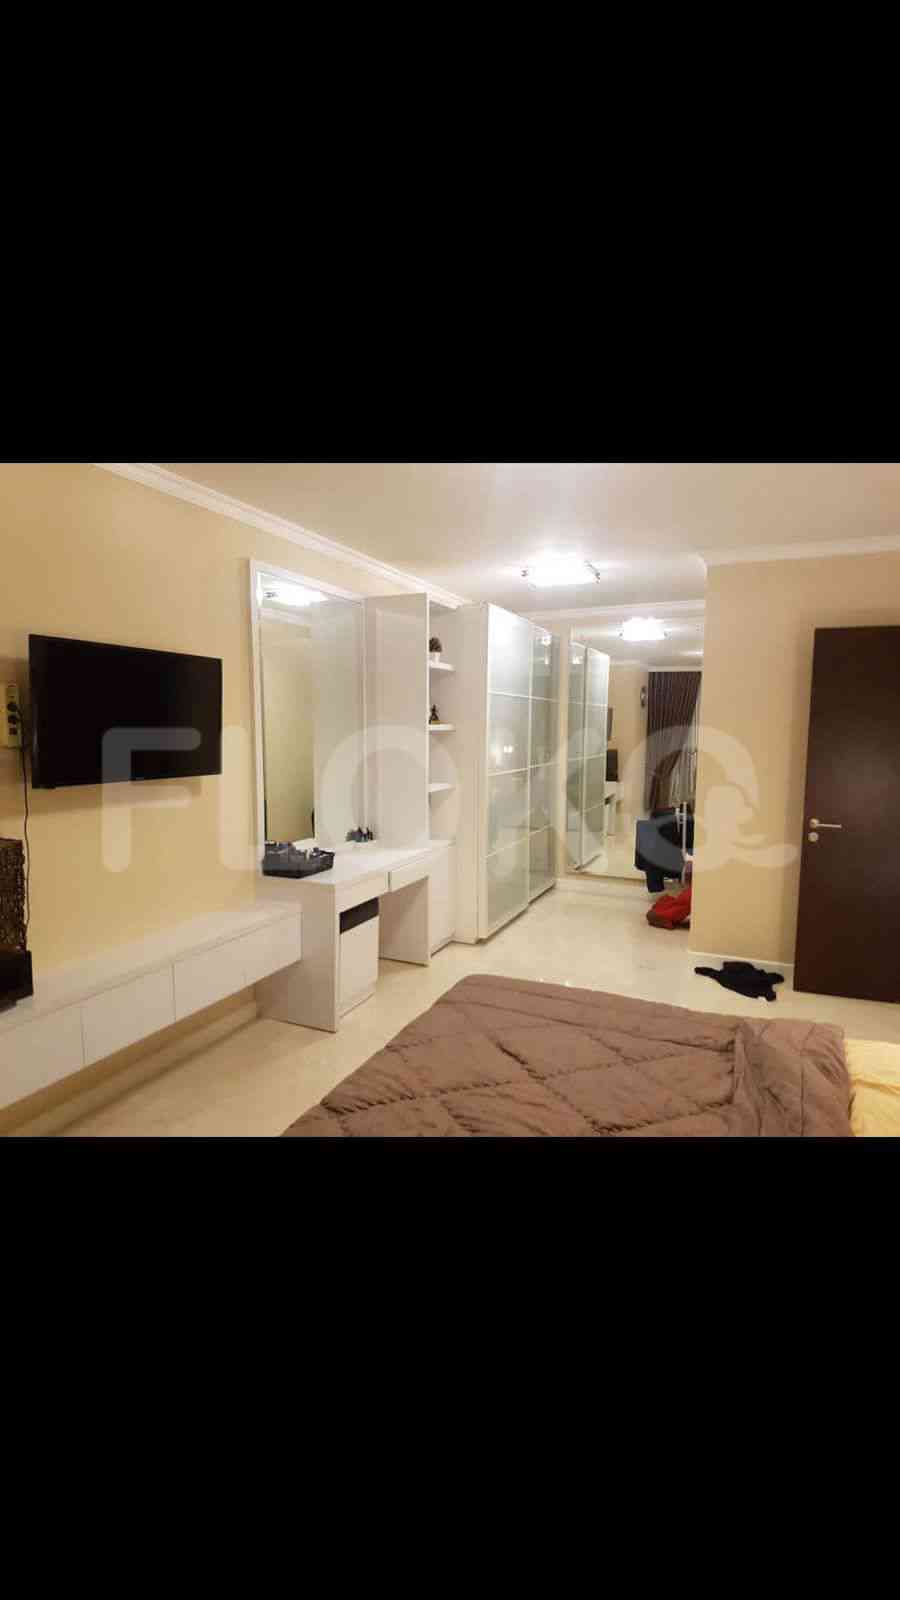 2 Bedroom on 26th Floor for Rent in Lavanue Apartment - fpafa4 3